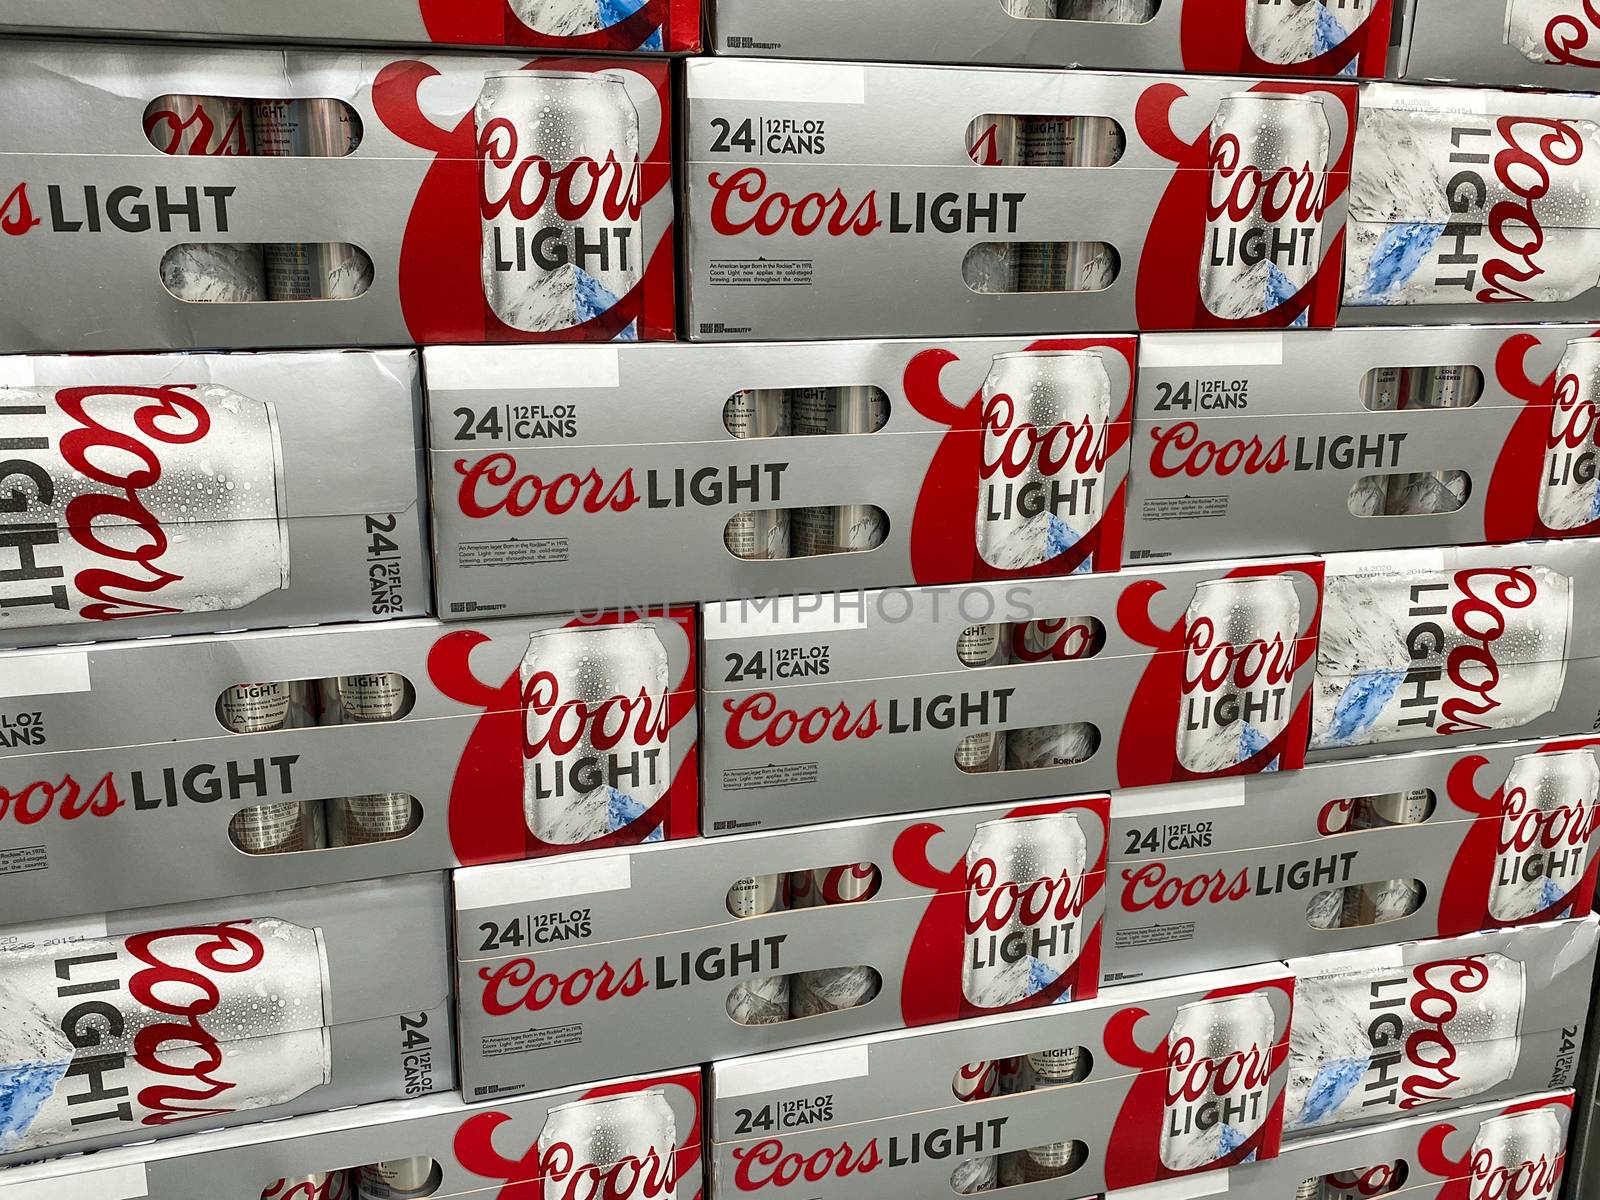 Orlando, FL/USA-5/15/20: Cases of cans of Coors Light Beer at a grocery store waiting for customers to purchase.  Coors Light is a product of American Moulson Coors Brewing Company.